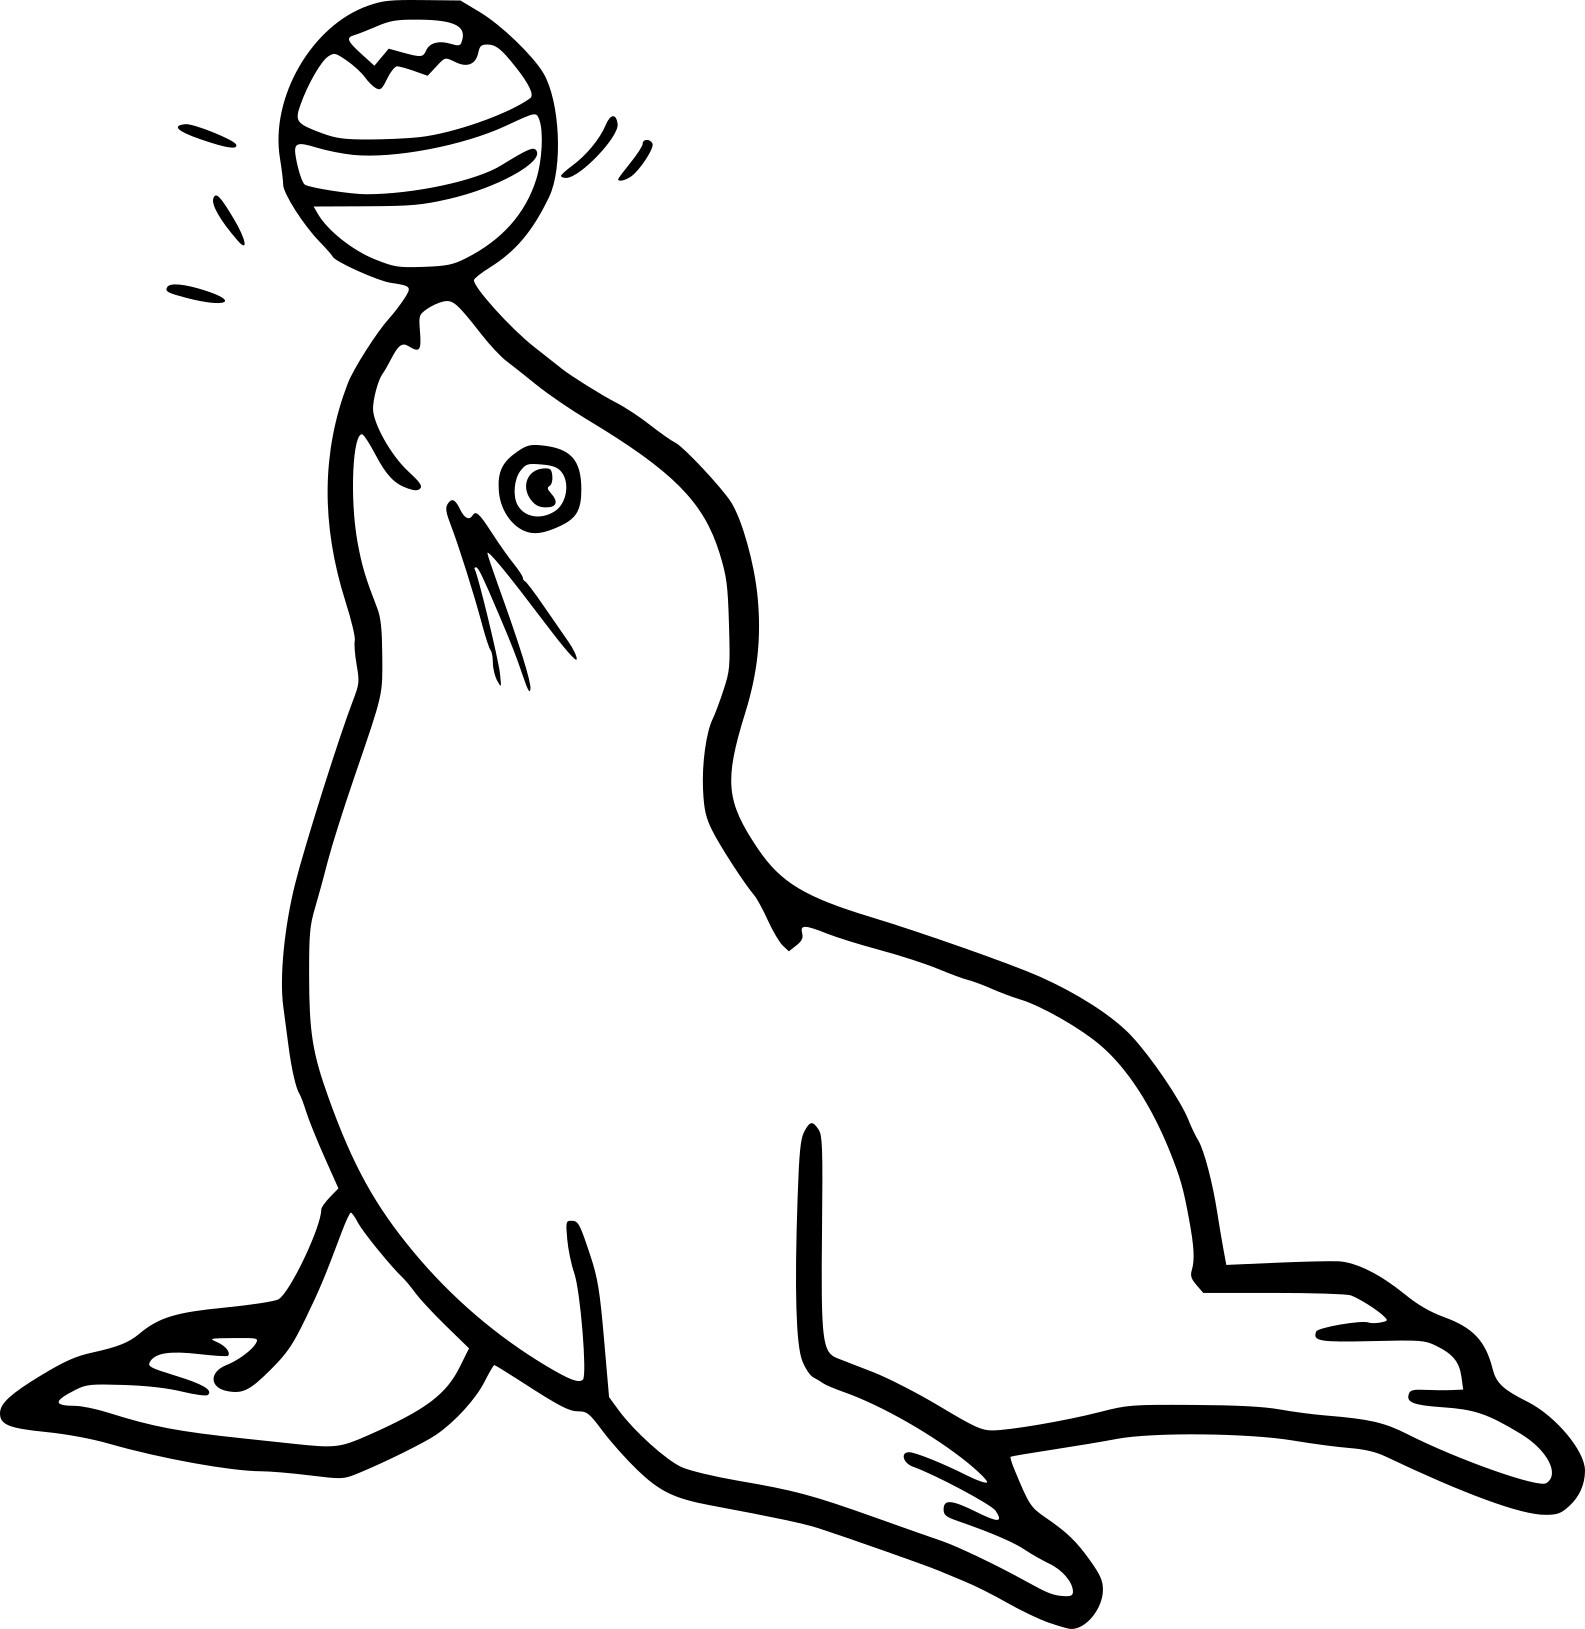 Seal With A Balloon coloring page